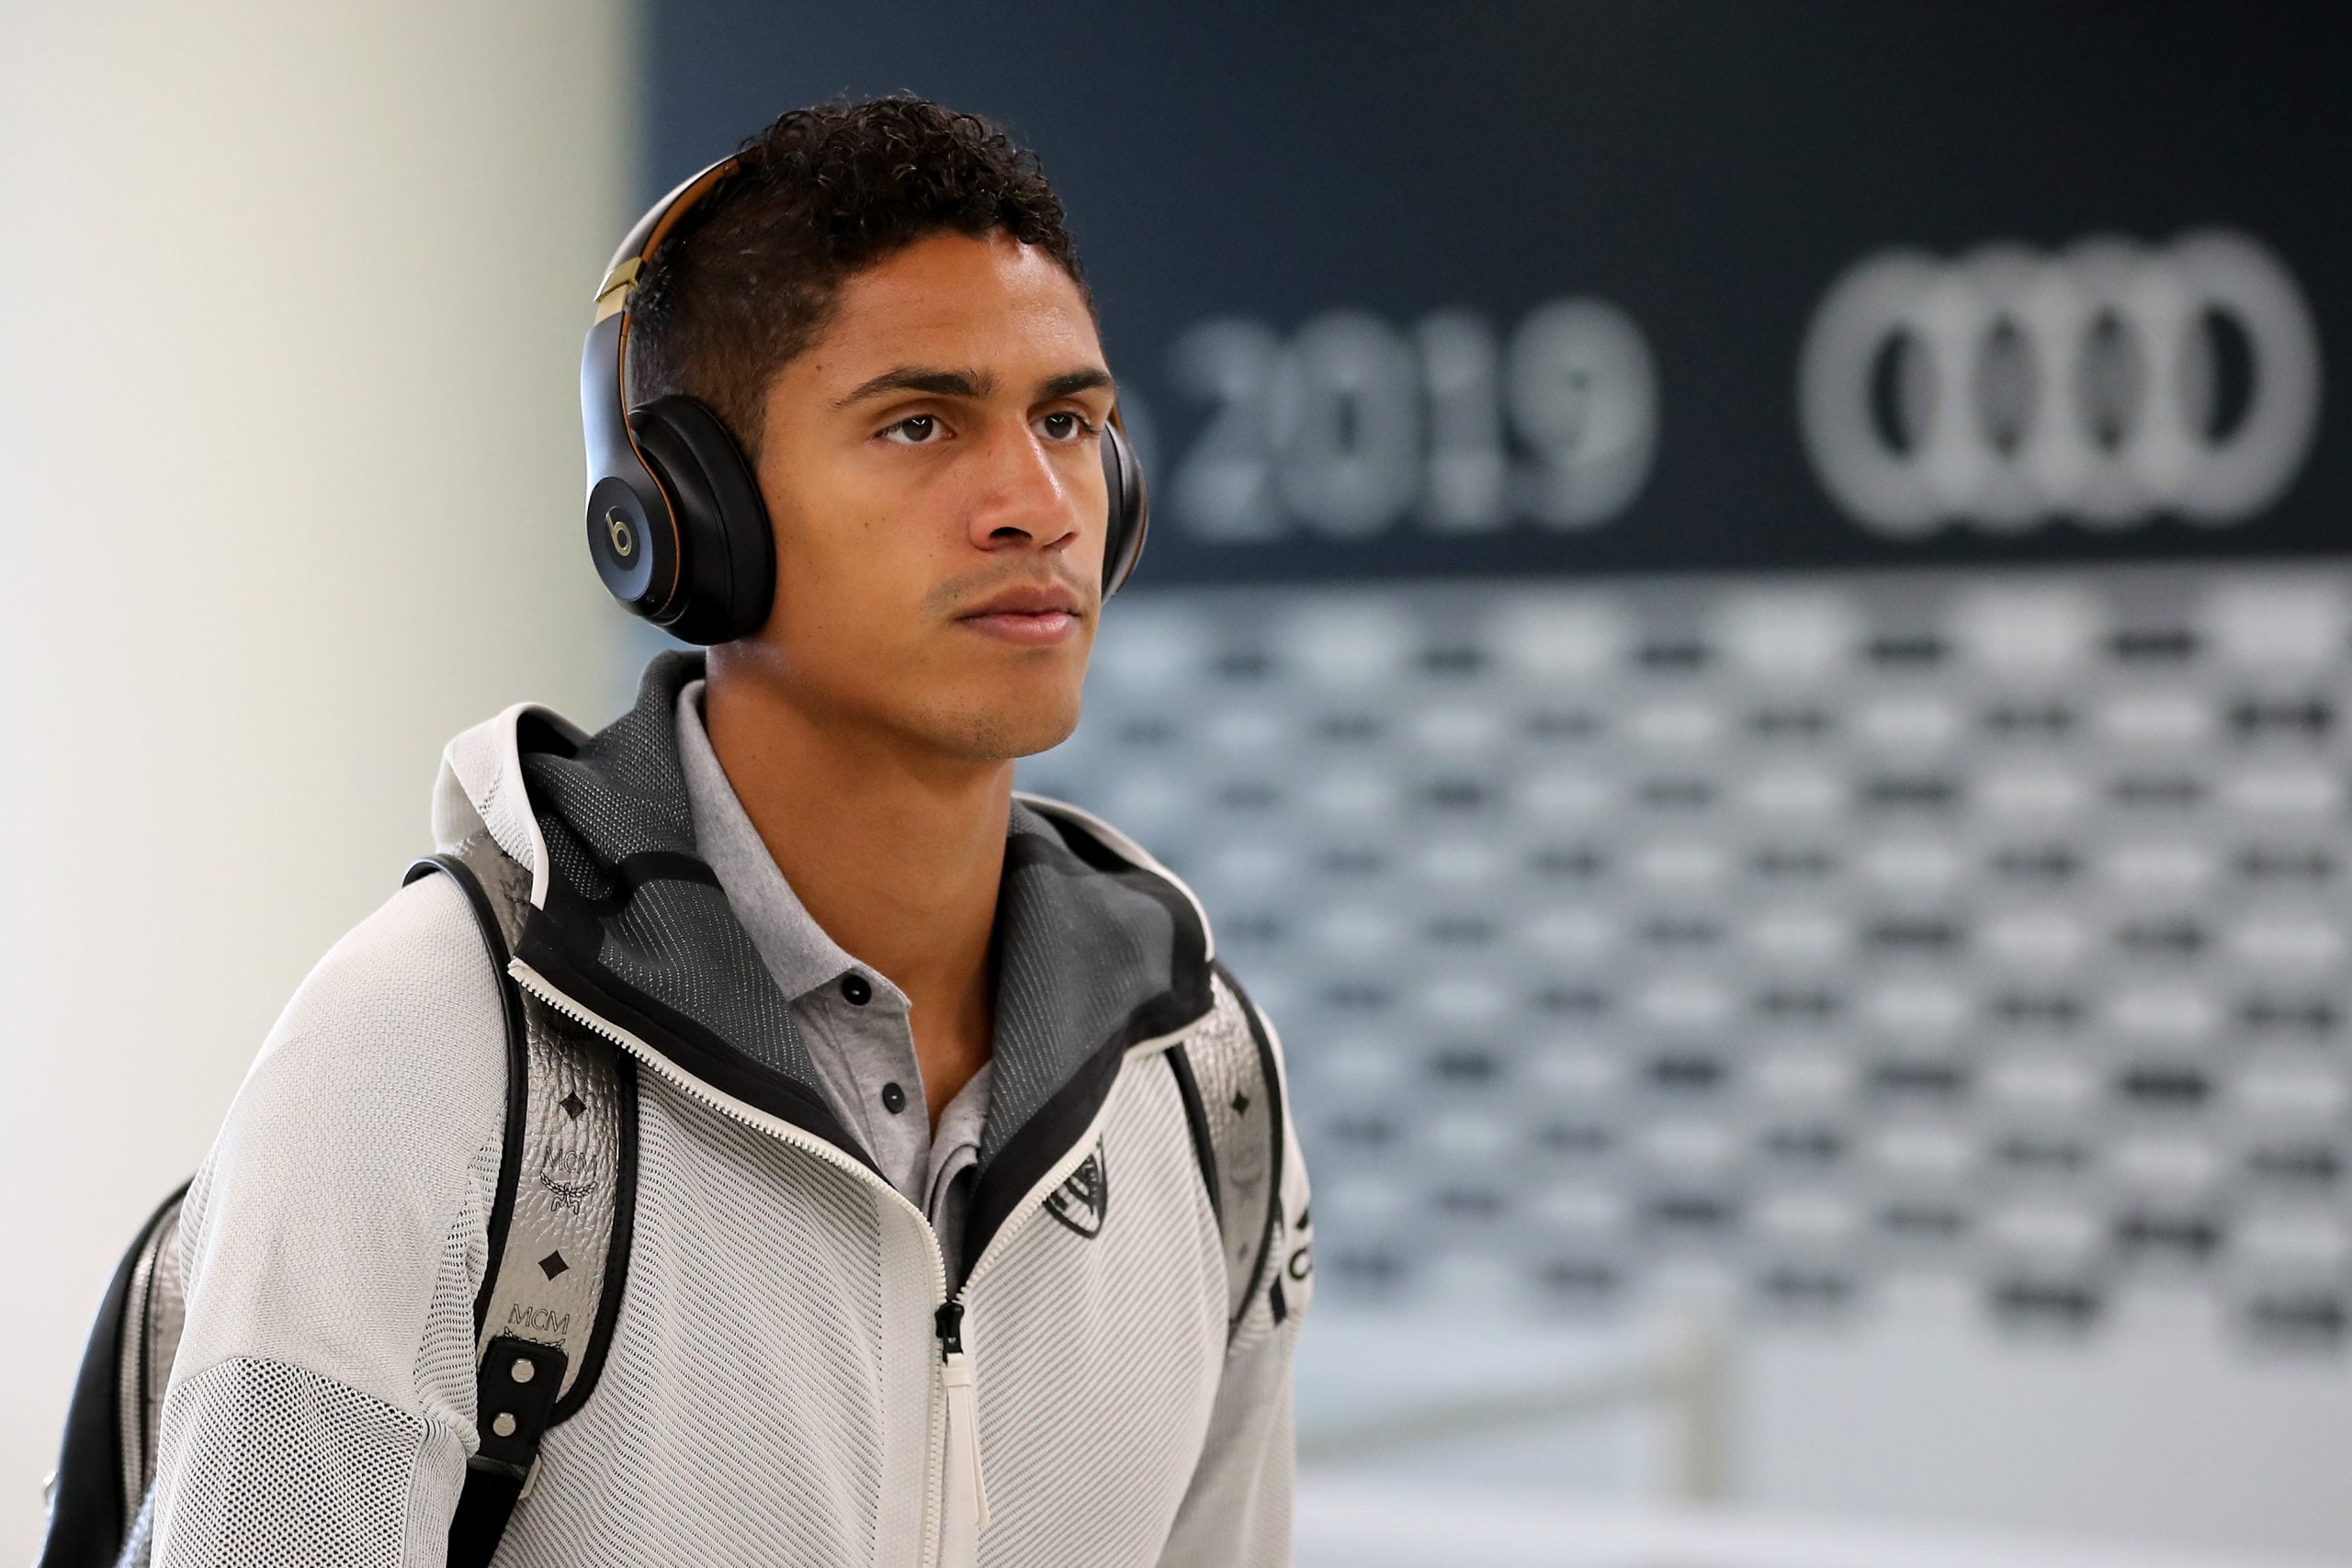 Real Madrid ready to part ways with Varane who is seen in the photo